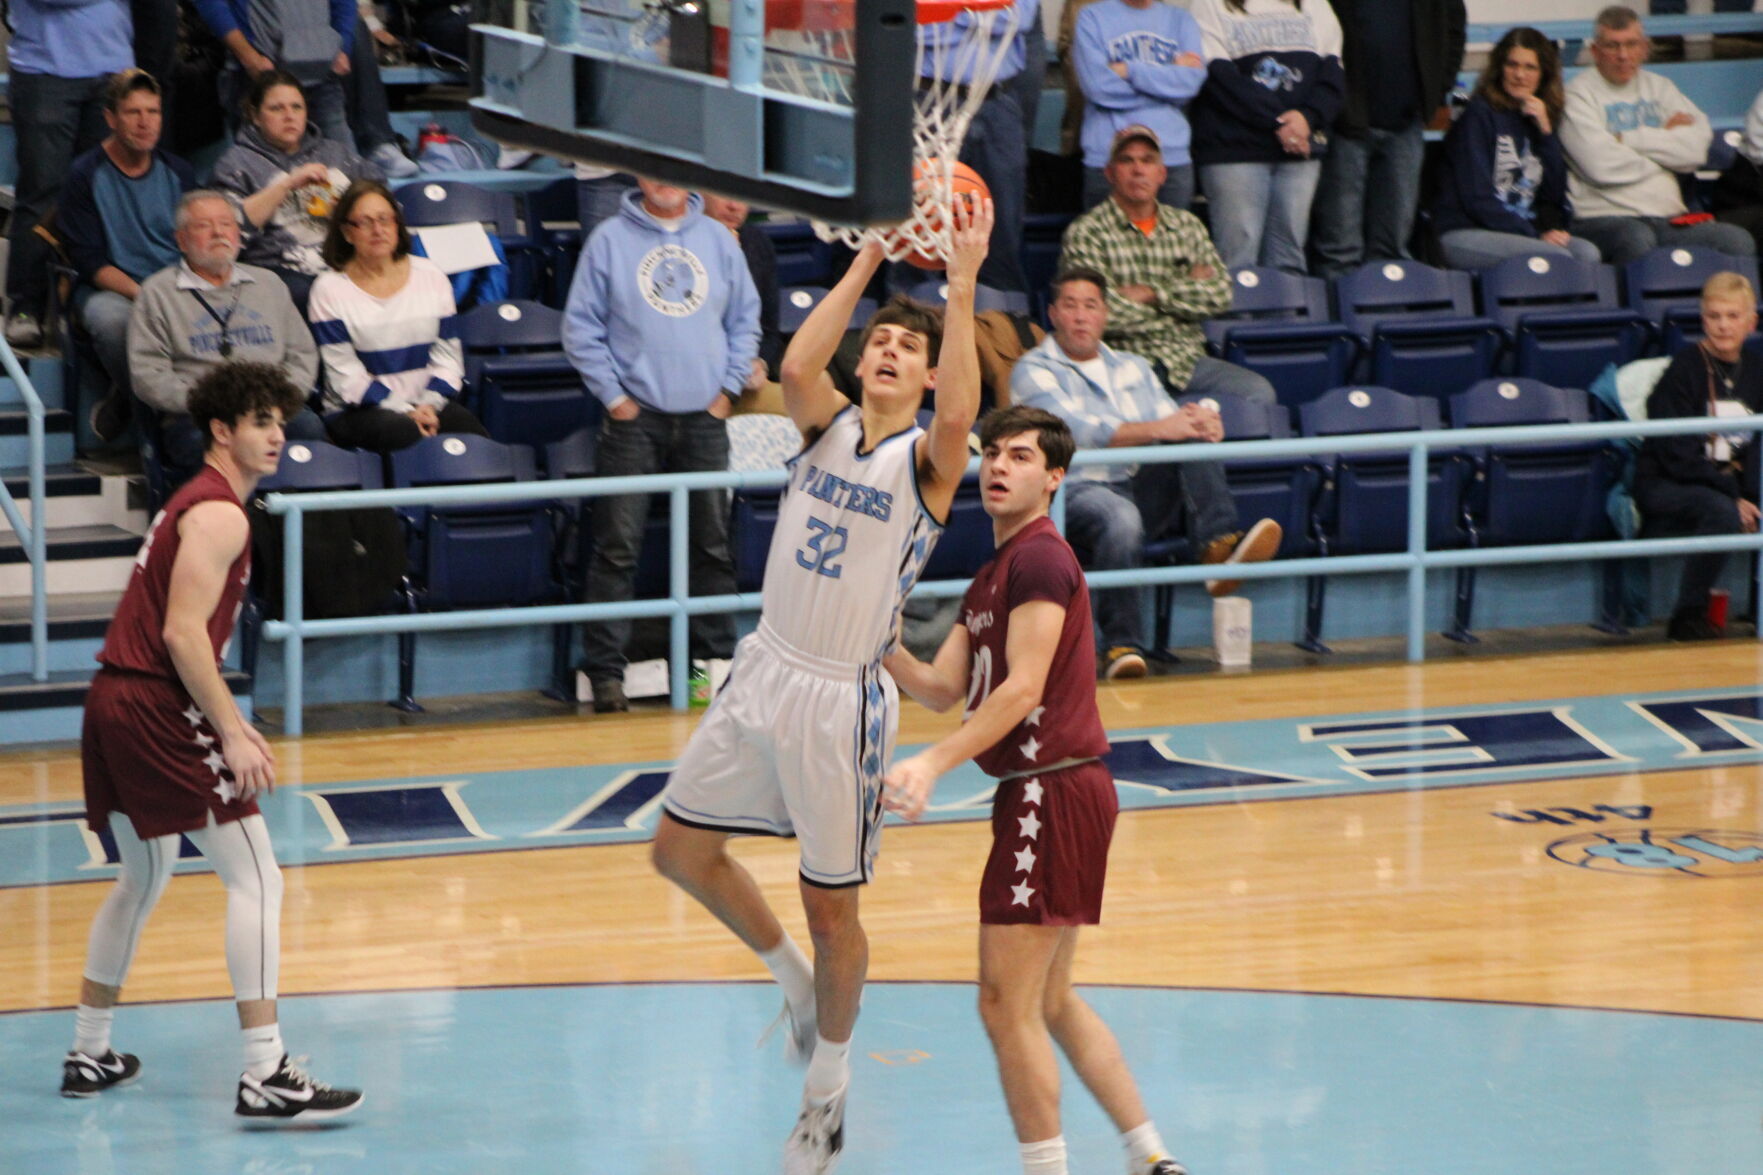 Benton’s 3-Point Shooting Secures 64-60 Victory Over Pinckneyville in Mississippi Division Battle